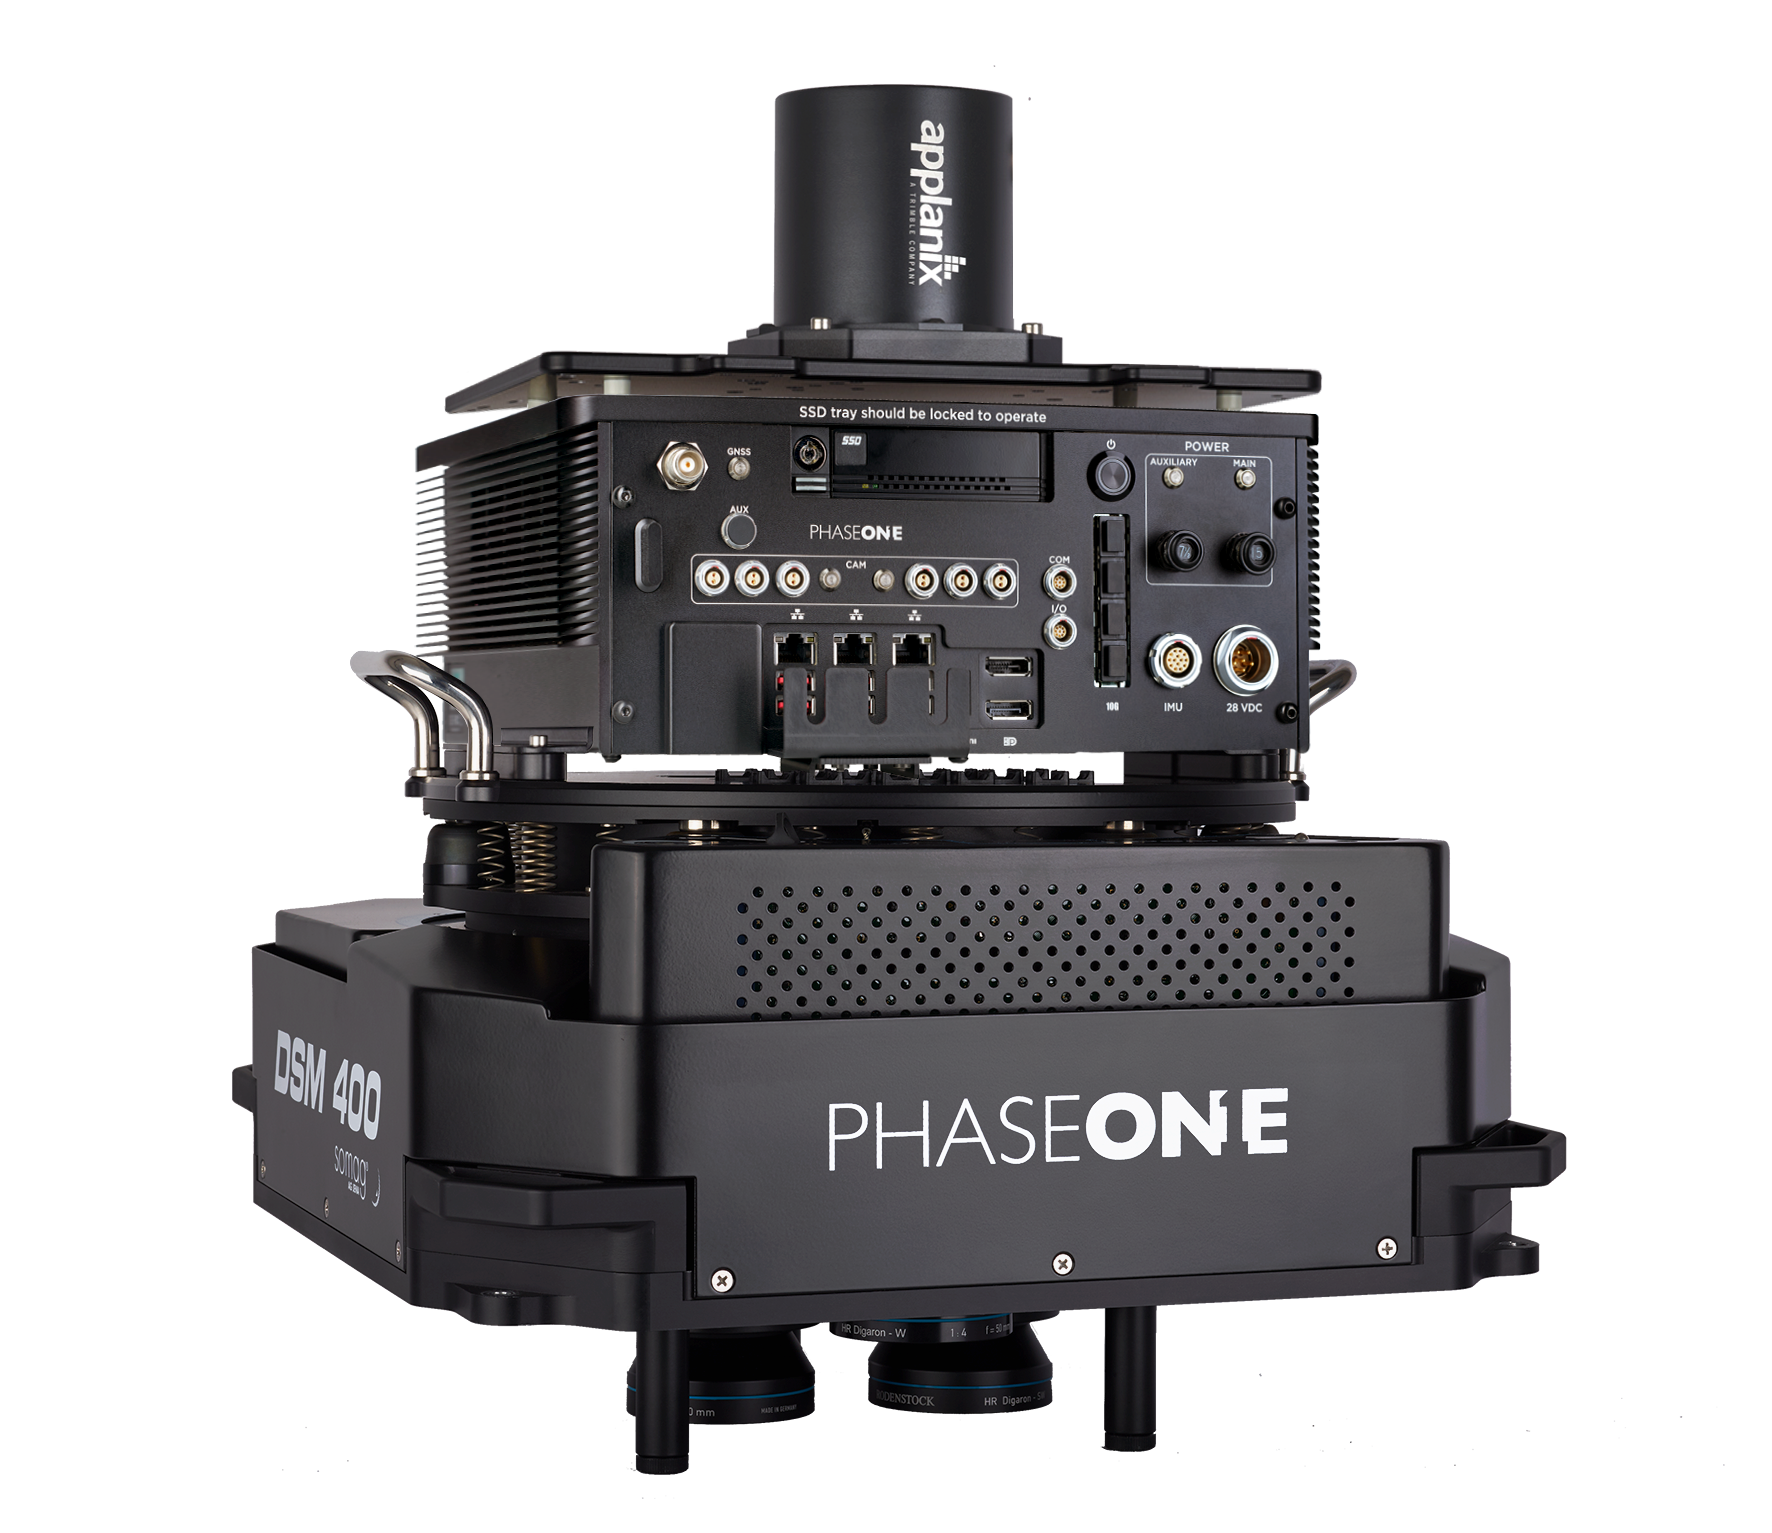 PhaseOne PAS 280 System